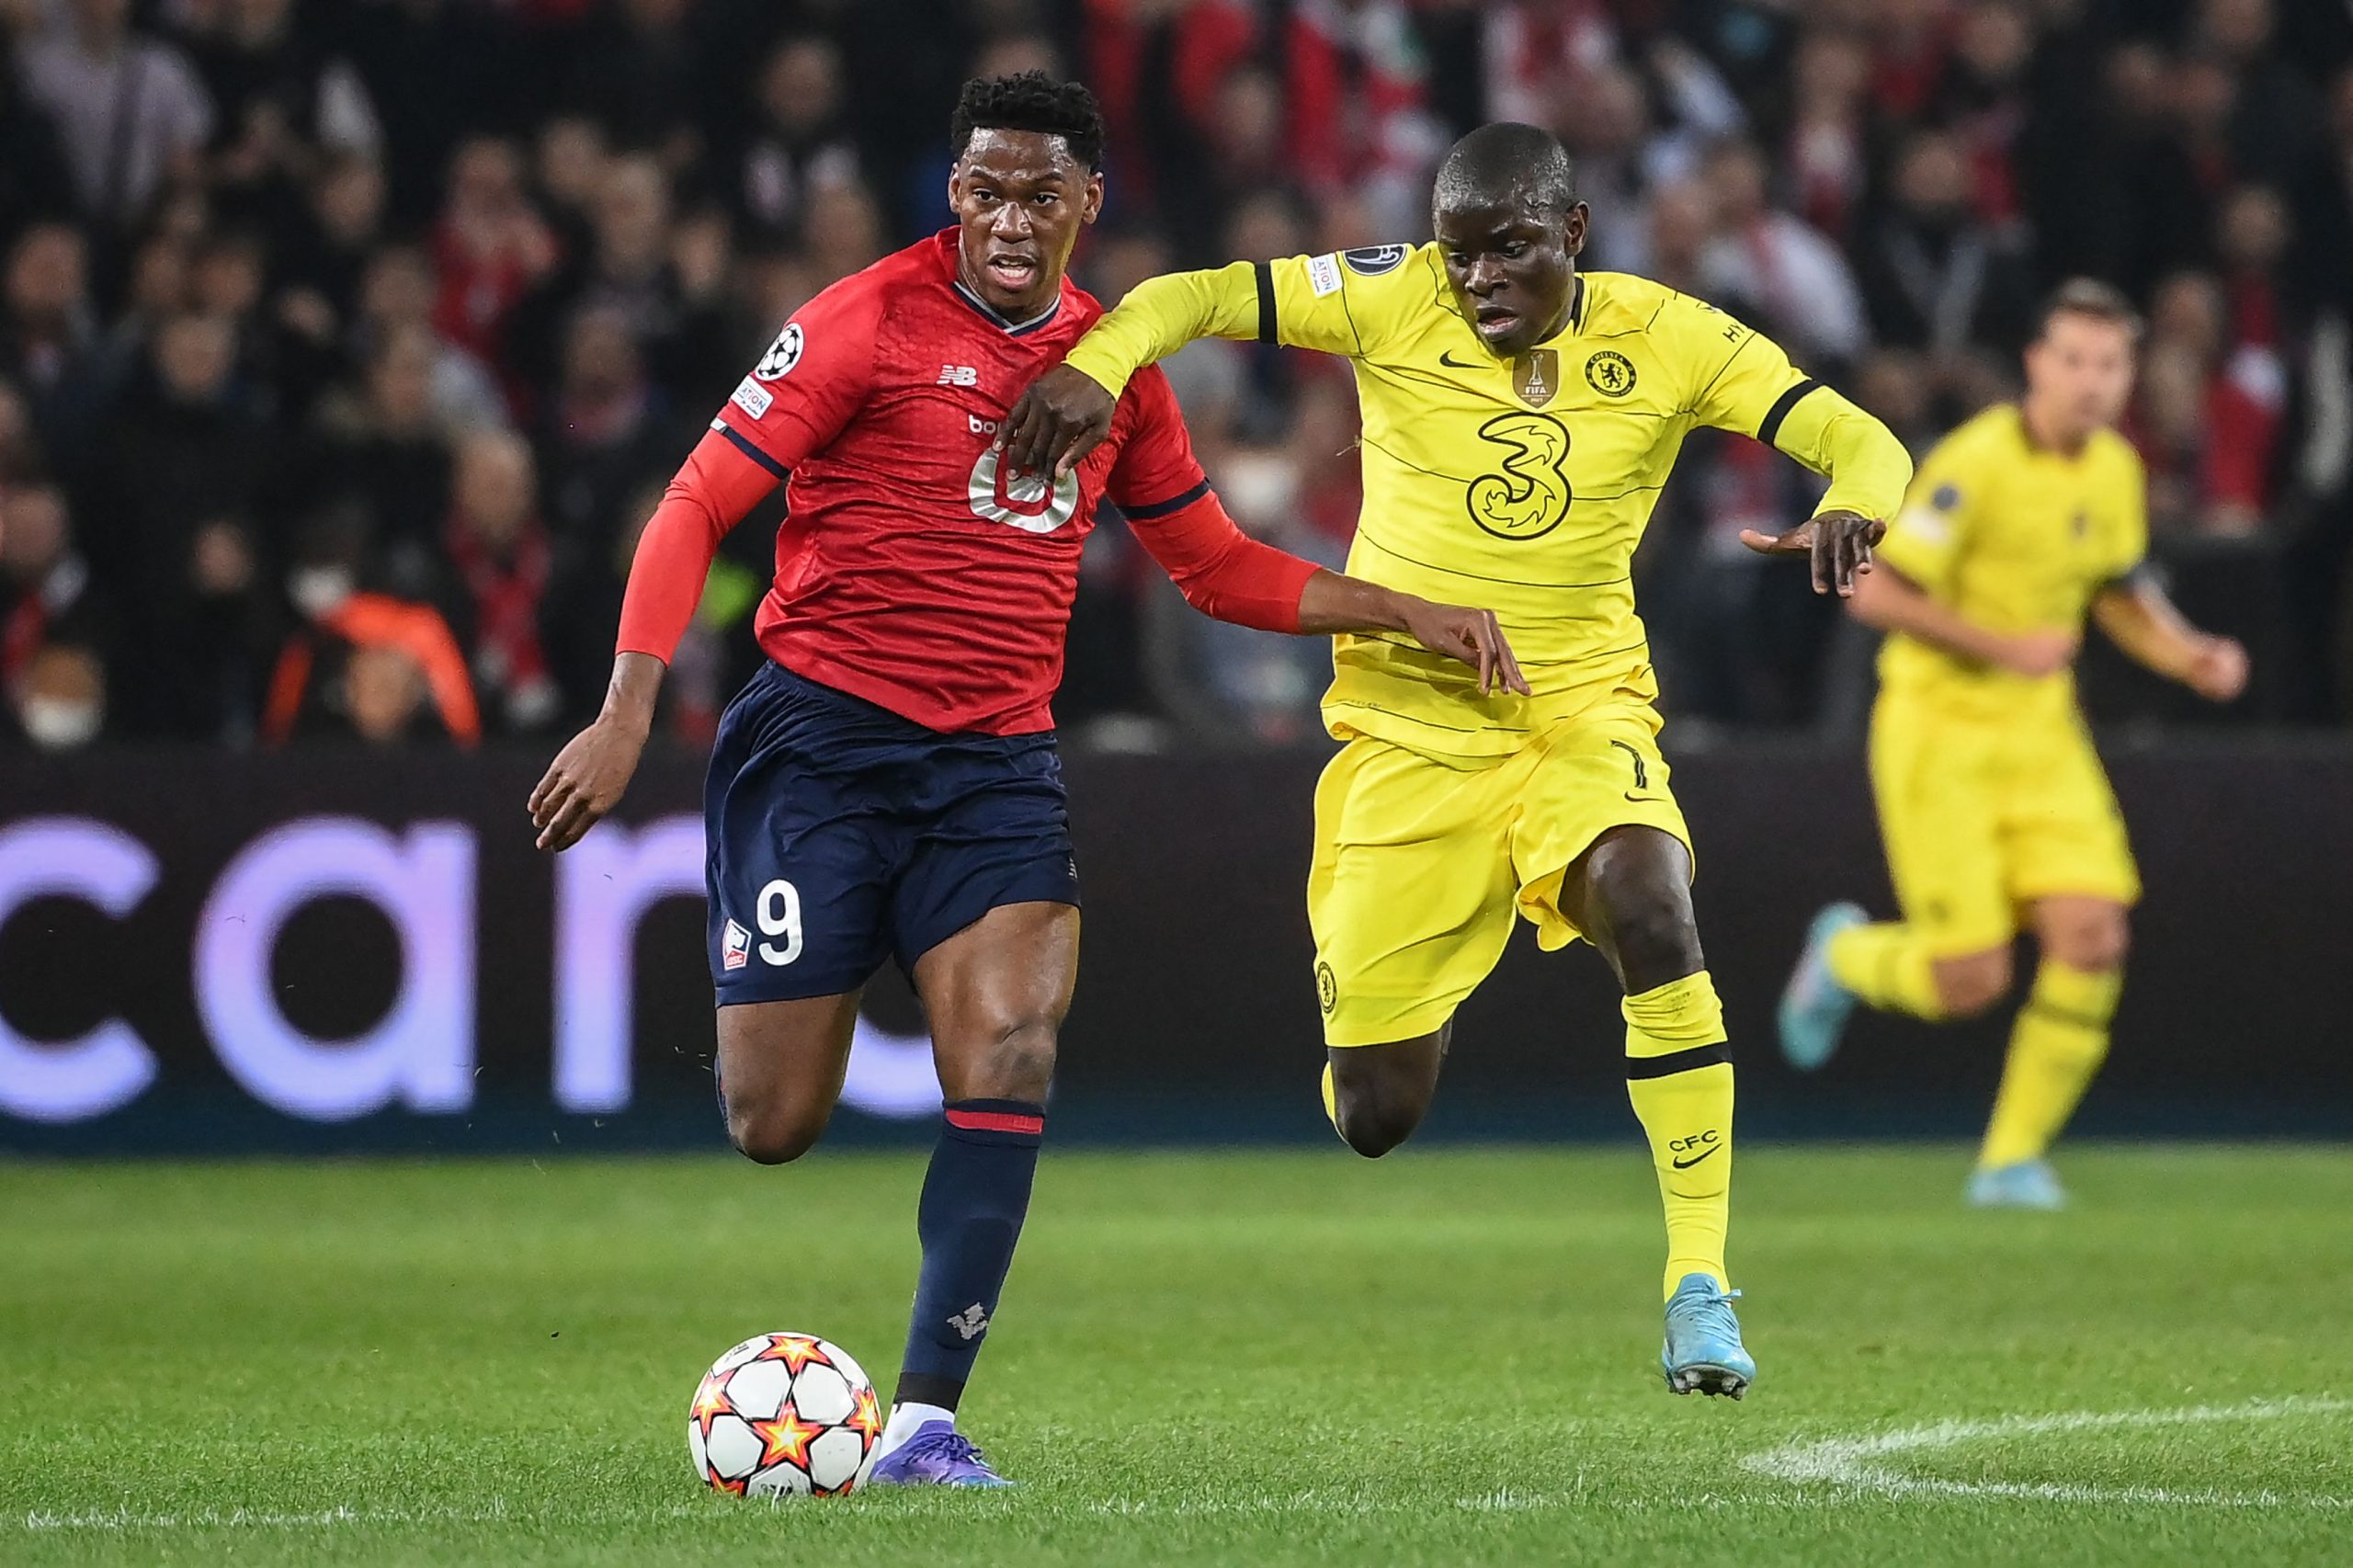 Tottenham Hotspur could target Jonathan David amidst Manchester United and Arsenal interest.